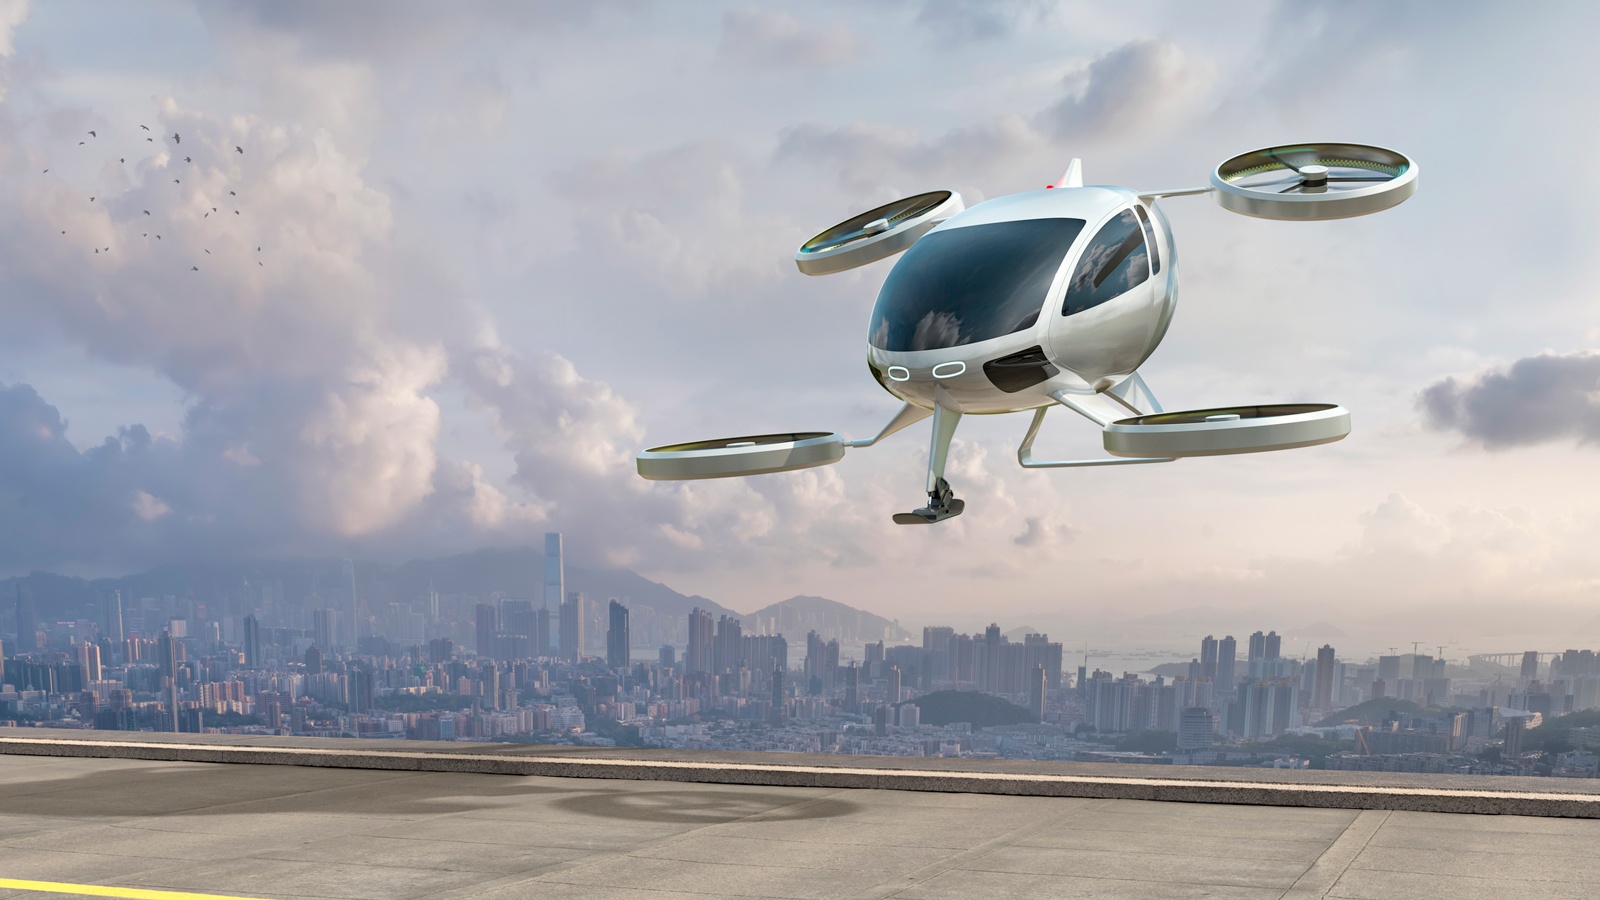 Chinese flying taxi sector is taking global lead thanks to supportive regulators